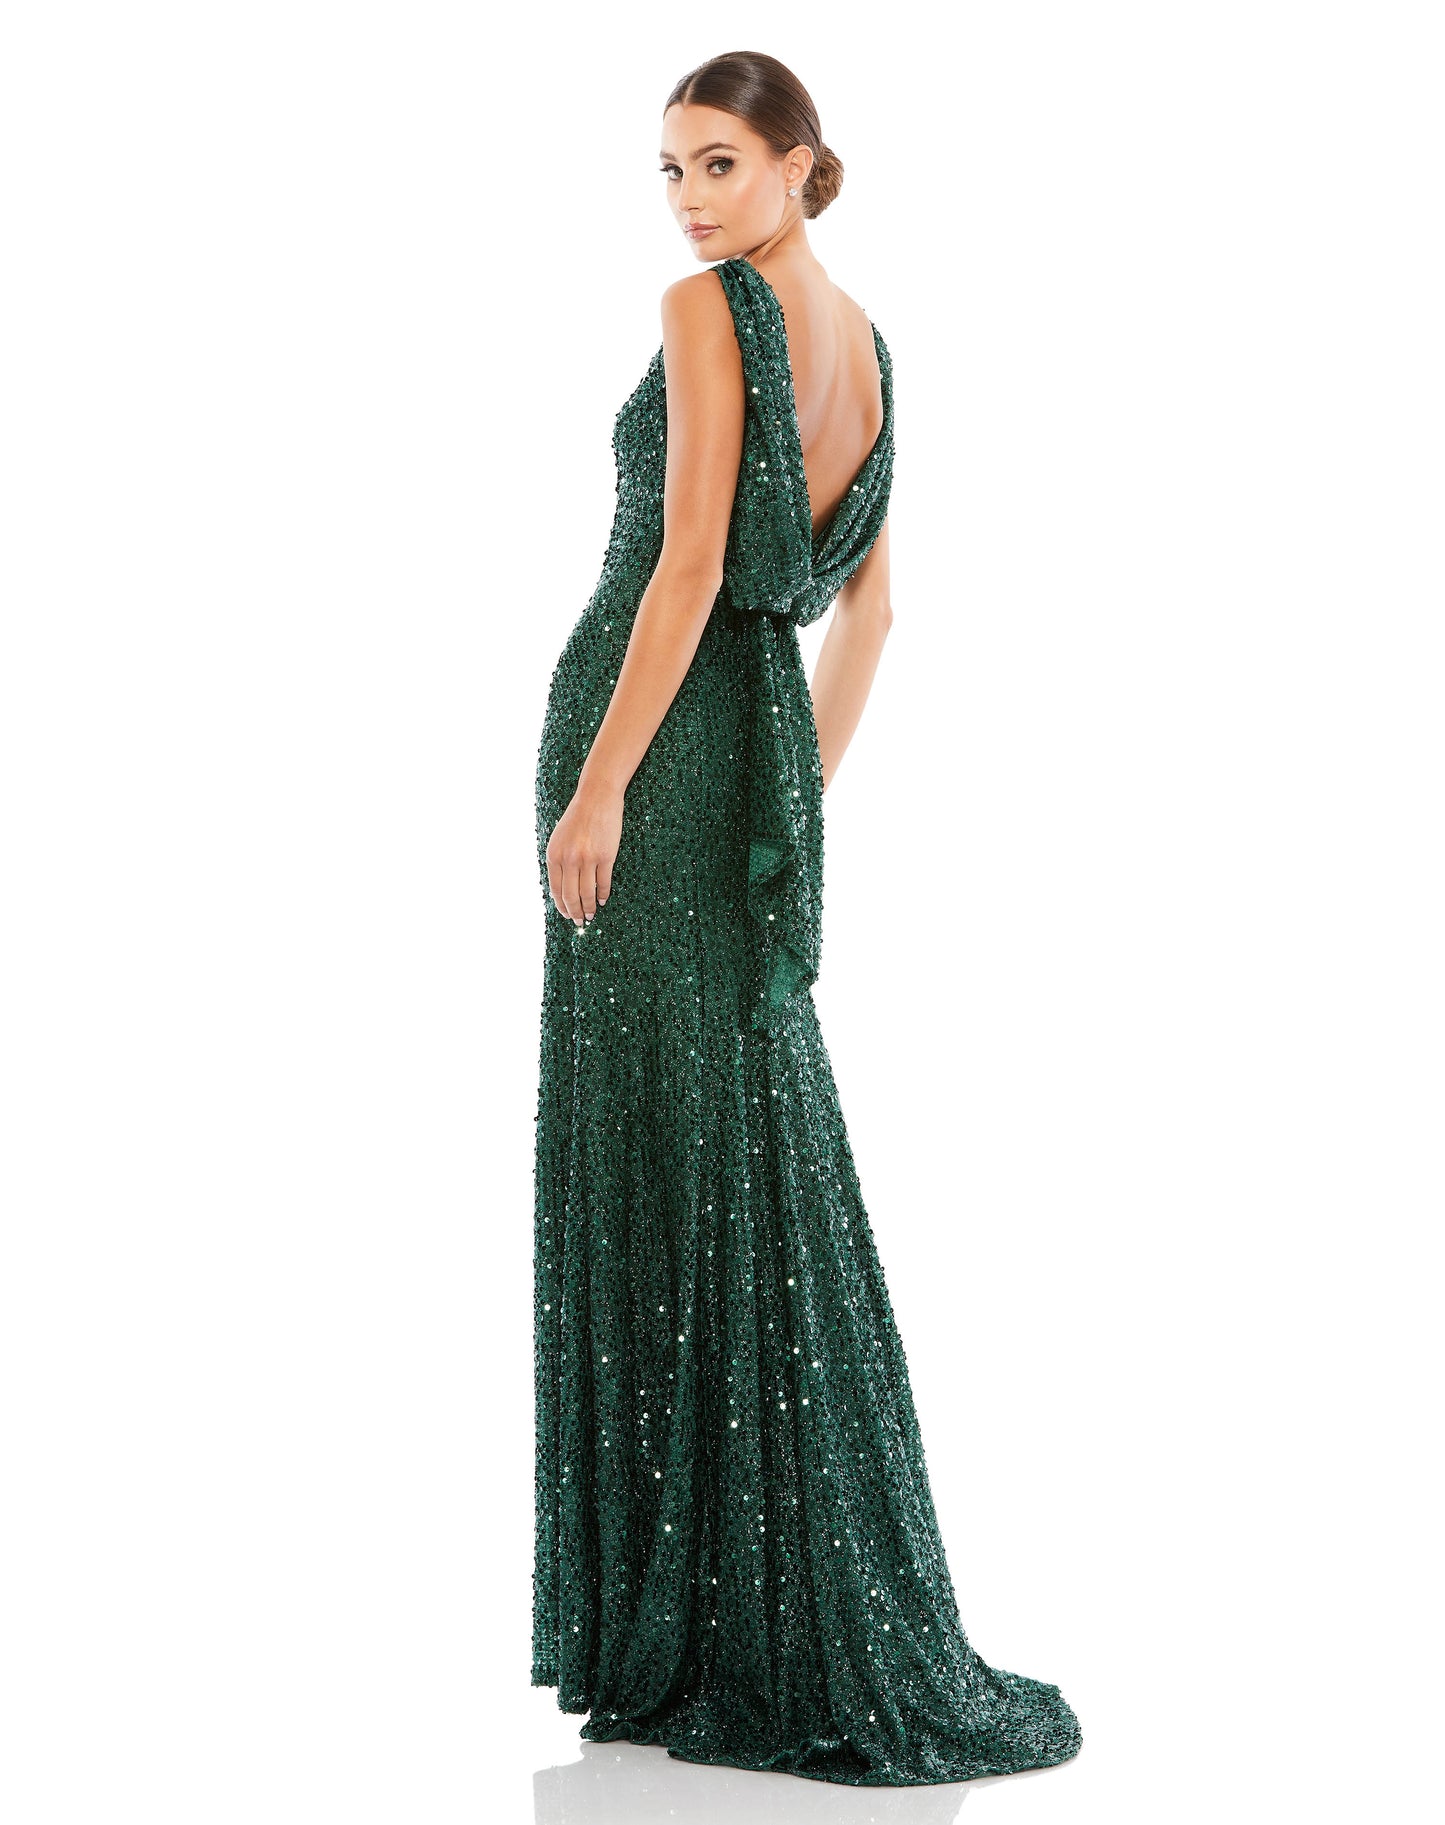 Cowl Back Boat Neck Sequined Evening Gown